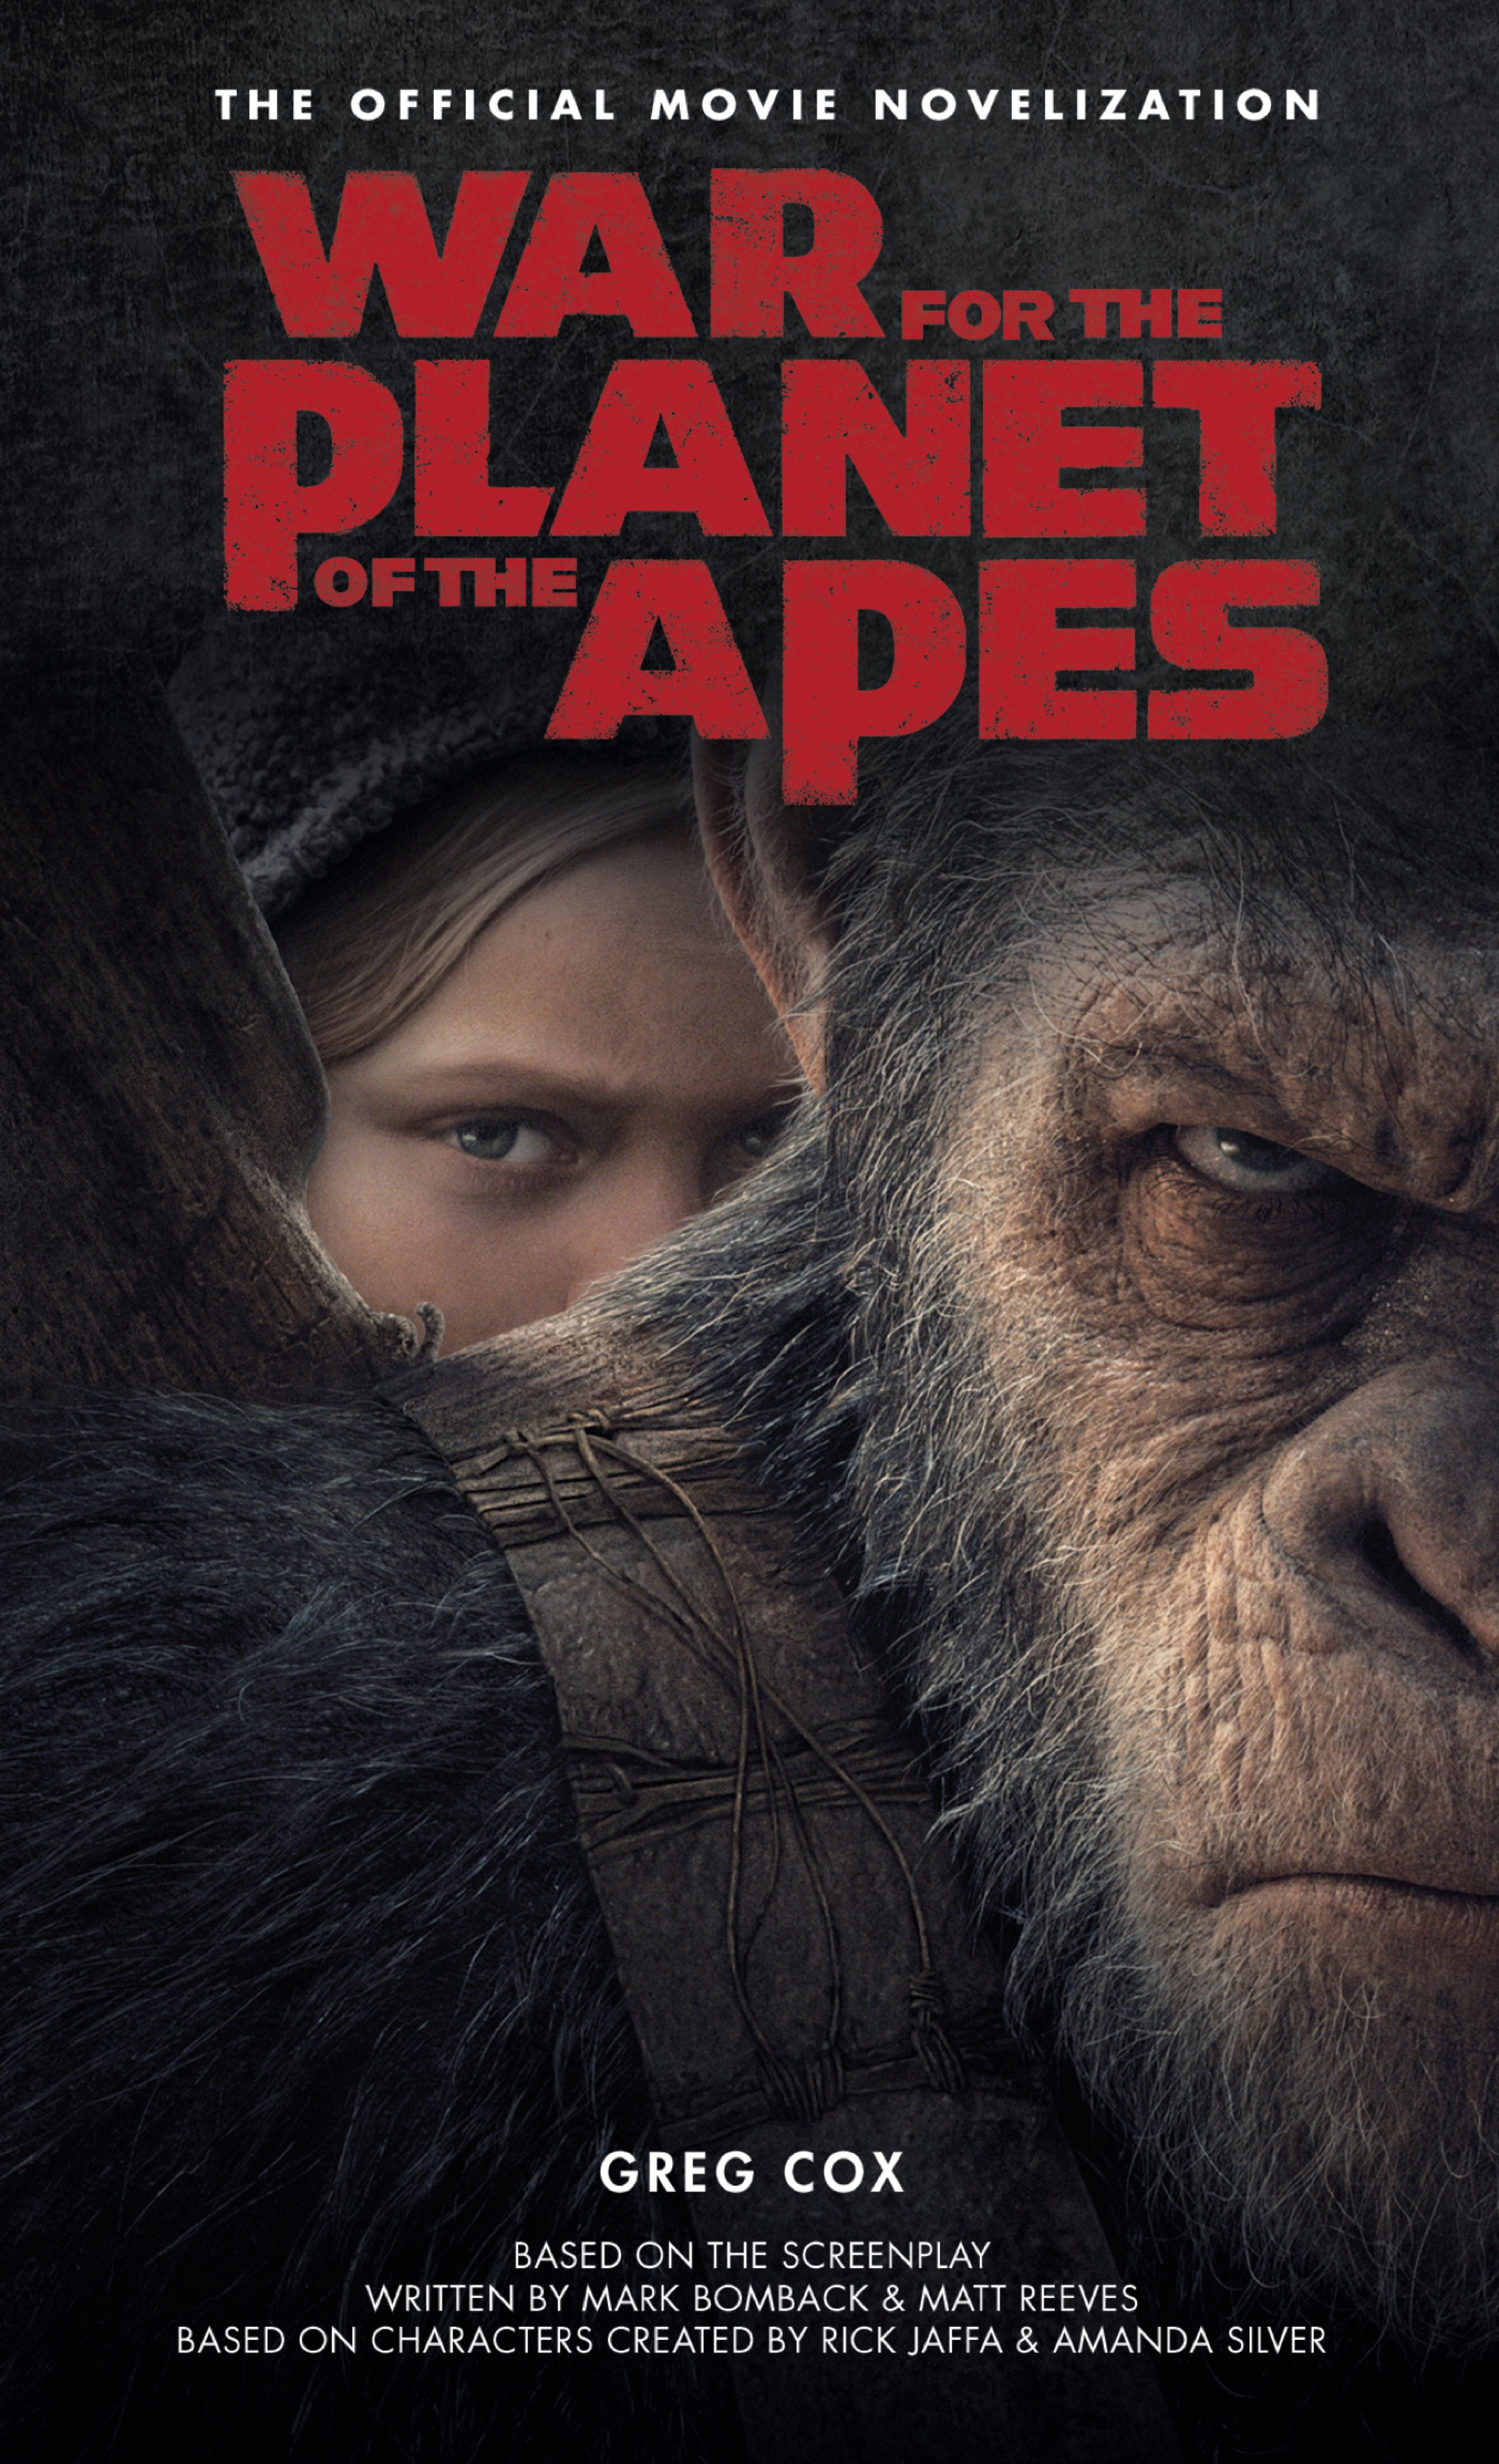 rise of the planet of the apes full movie online free